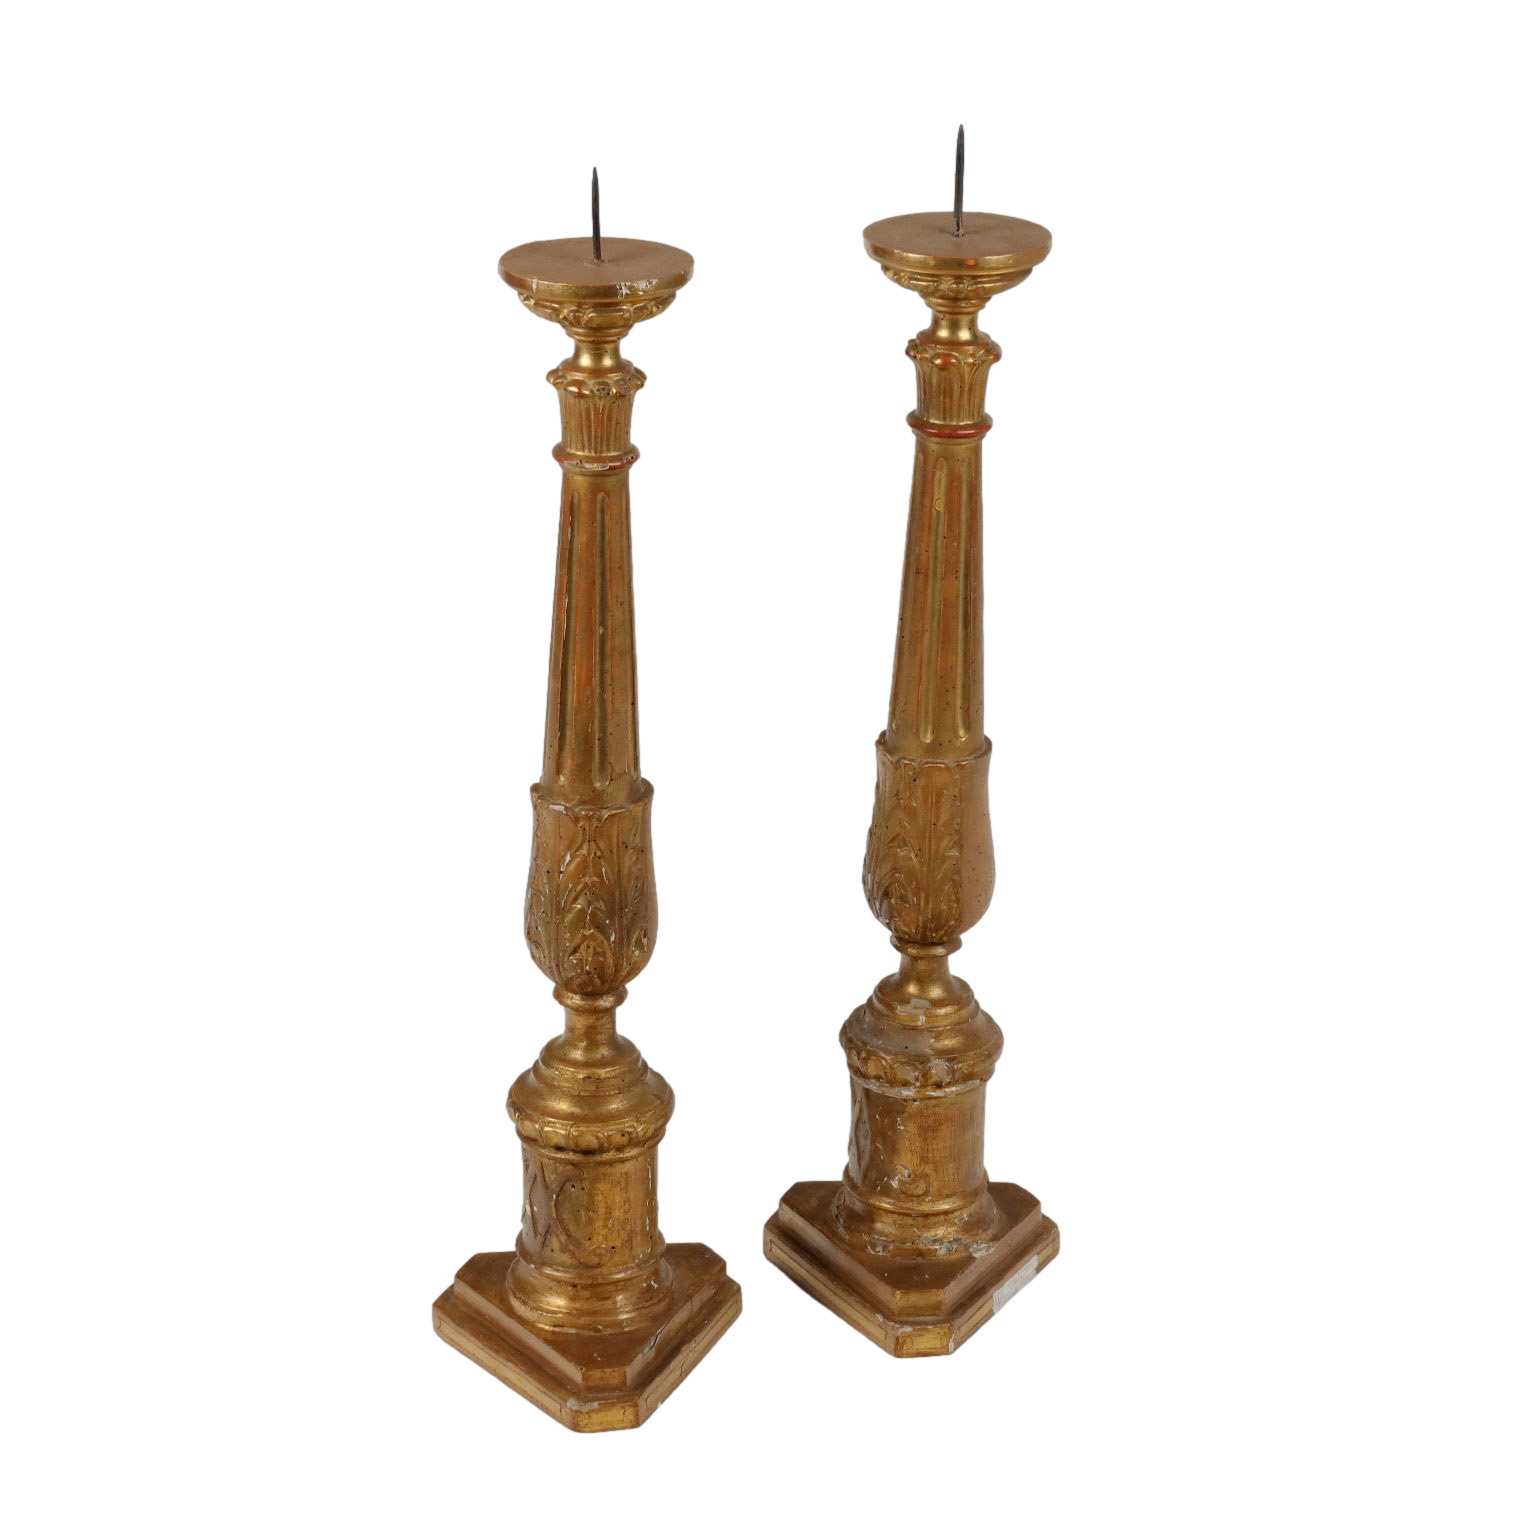 Pair of Vintage Brass Champleve Candle Holders with Floral & Leaf